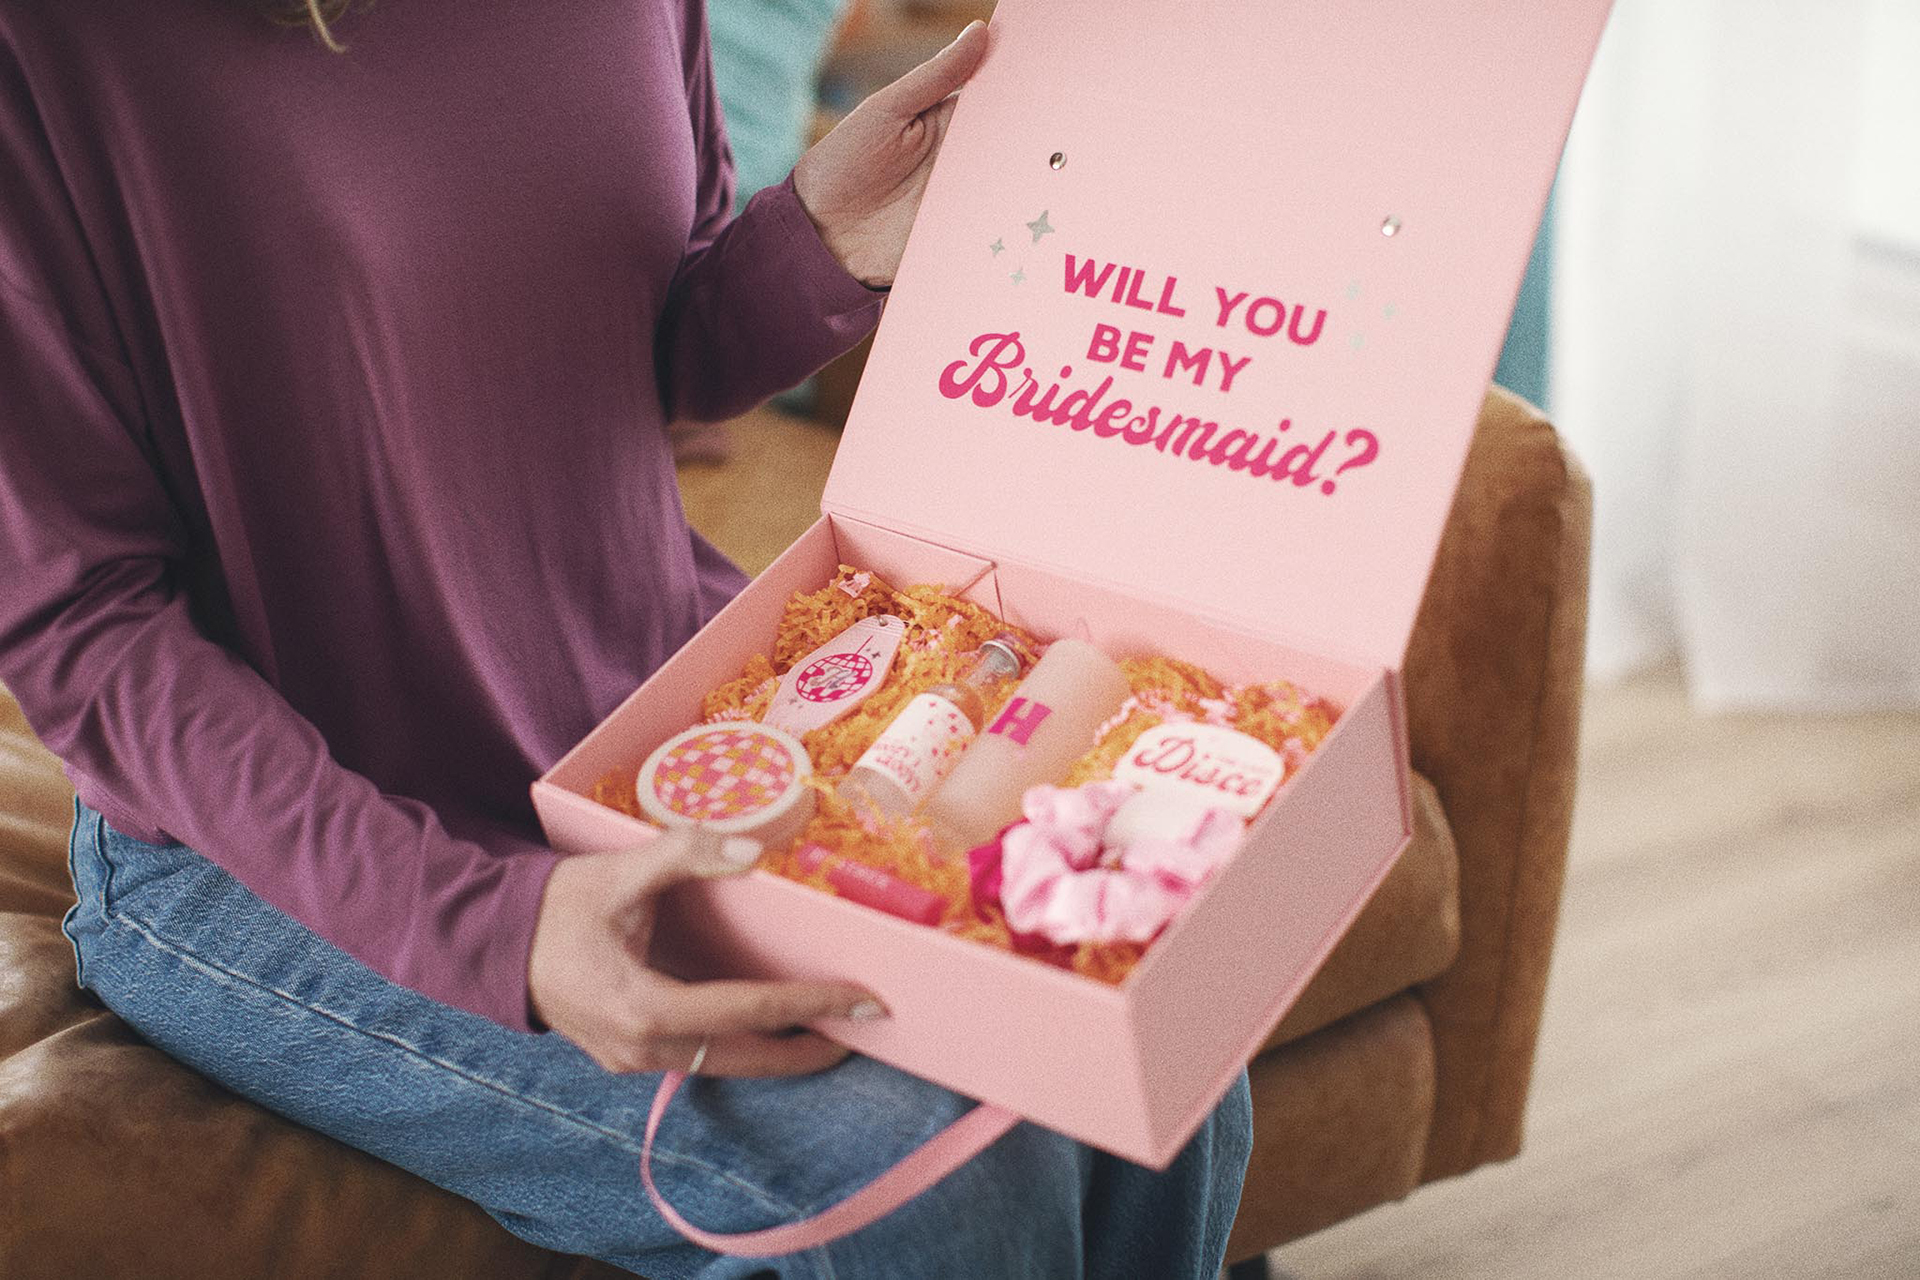 How to propose to your bridesmaids and groomsmen